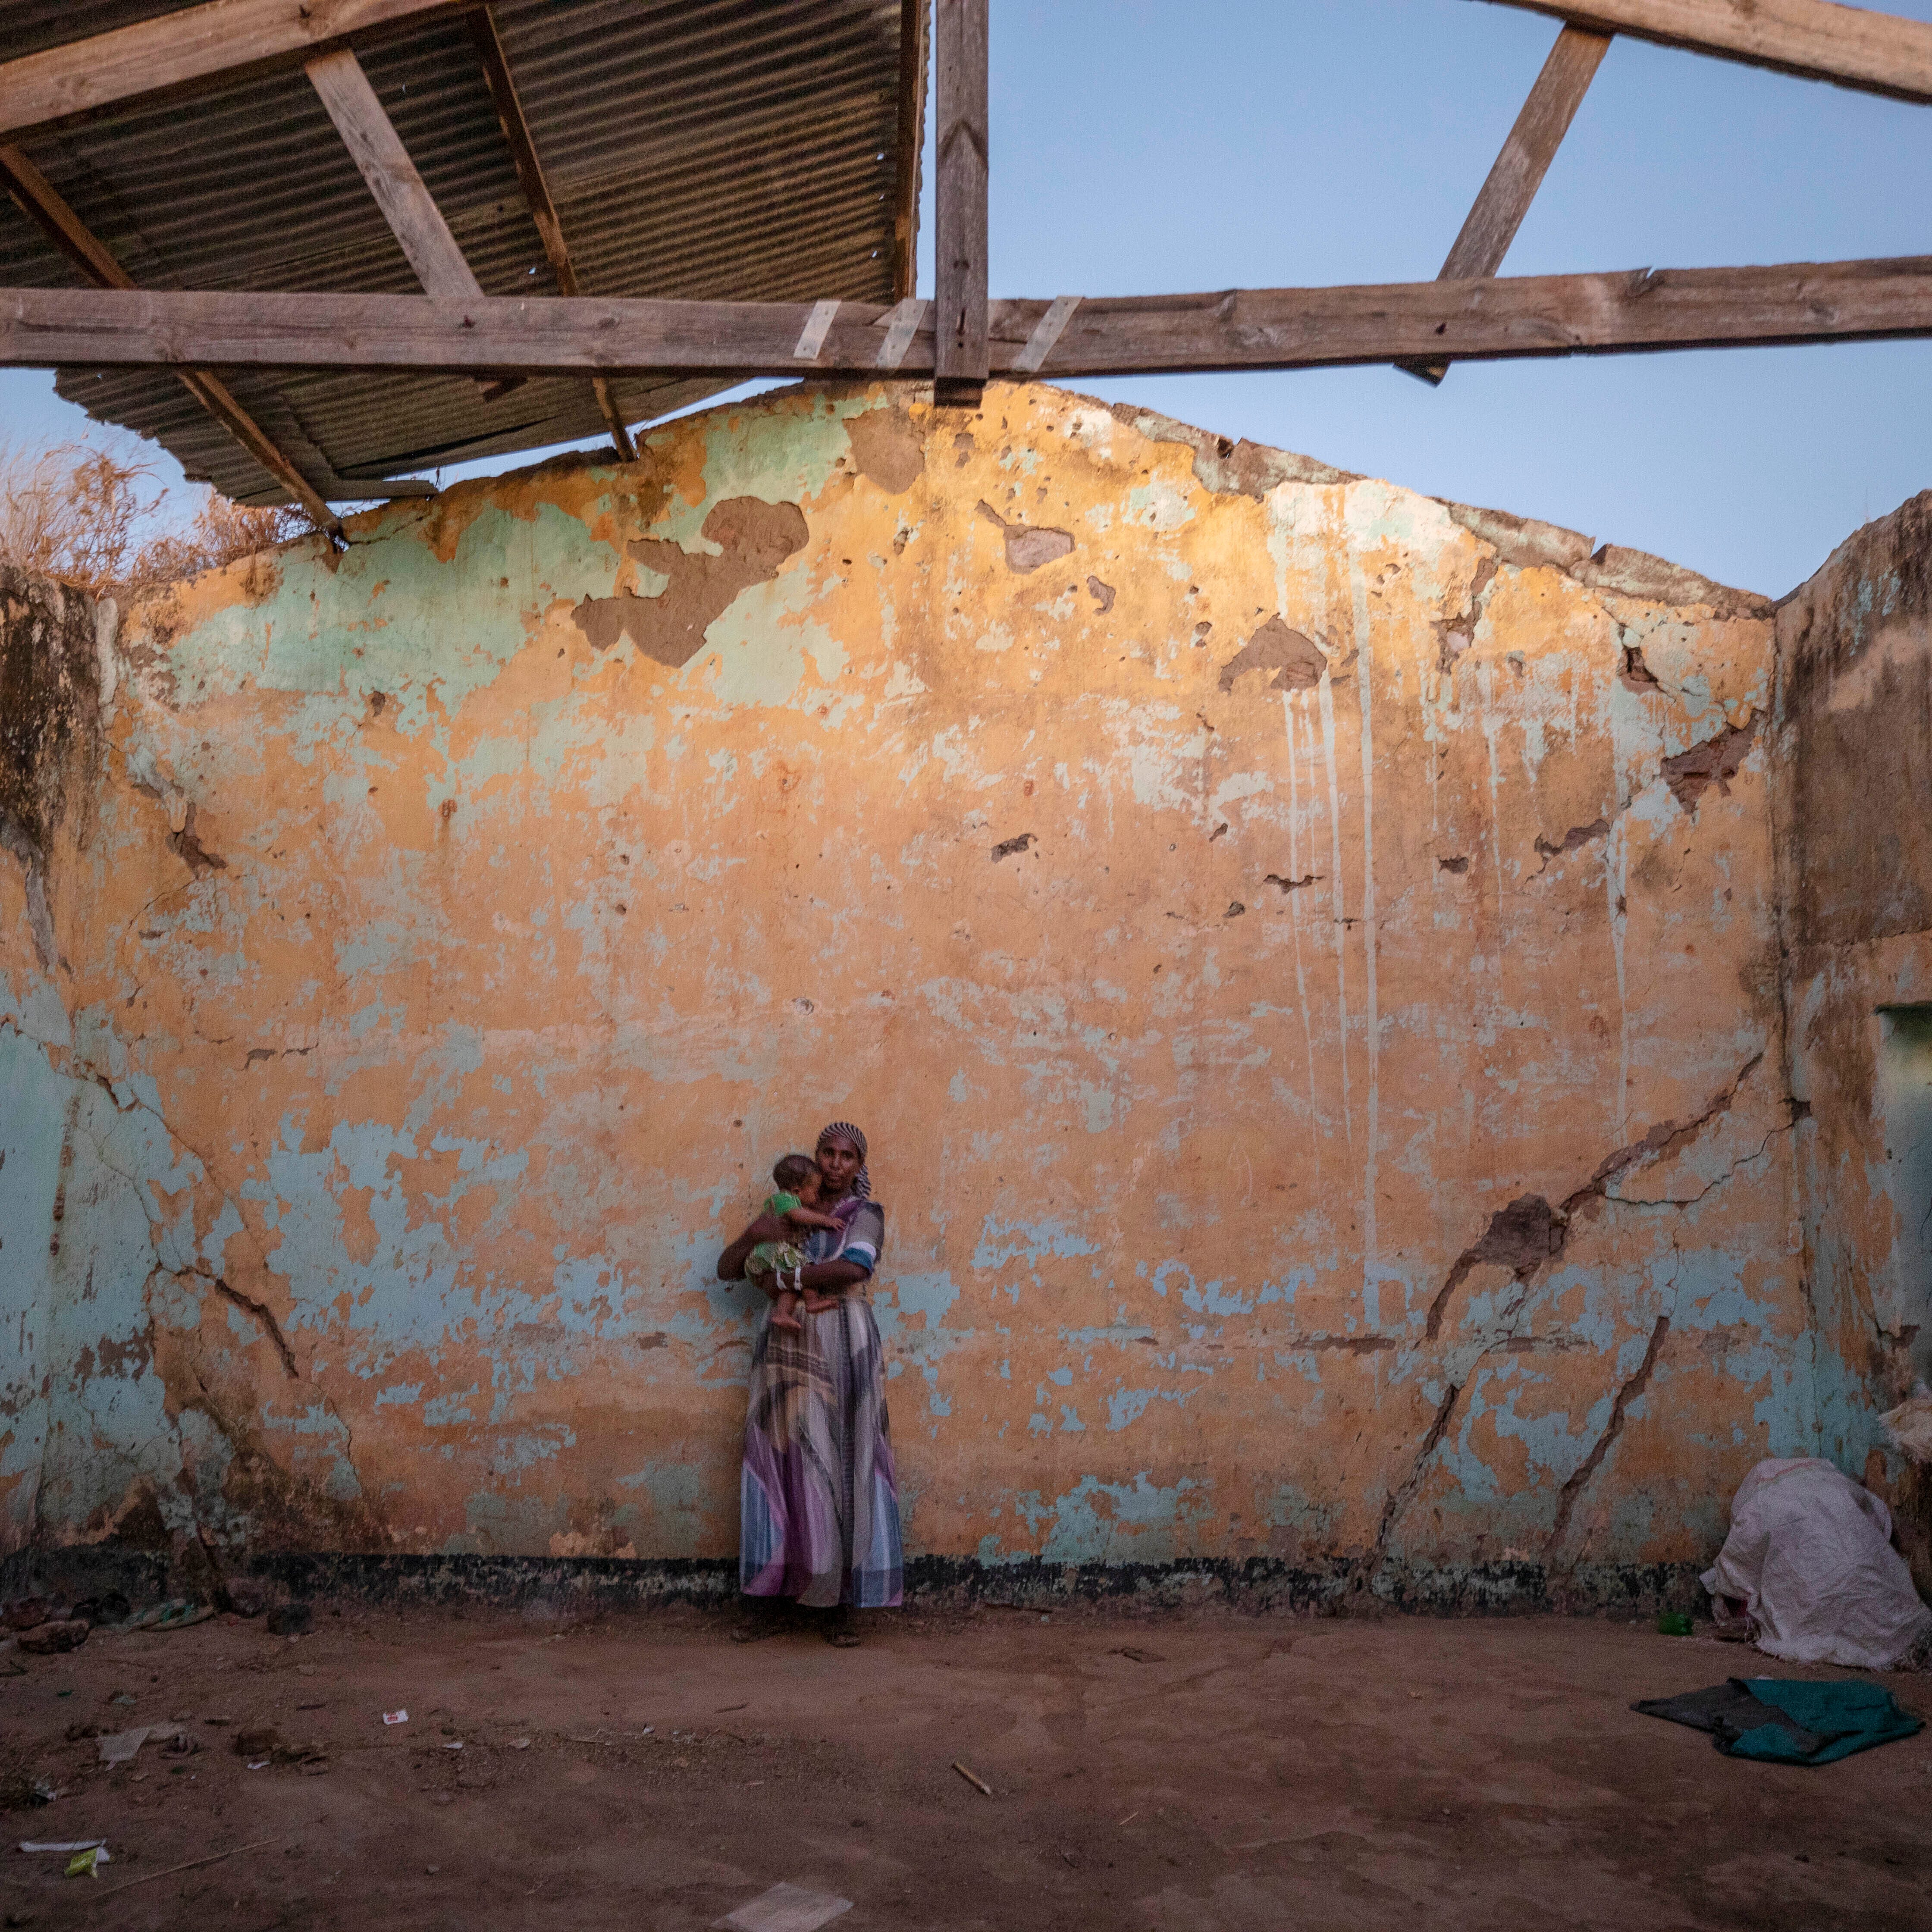 A woman who fled the conflict in Ethiopia's Tigray region holds her child inside of her temporary shelter at Umm Rakouba refugee camp in Qadarif, eastern Sudan, Monday, December 7, 2020.